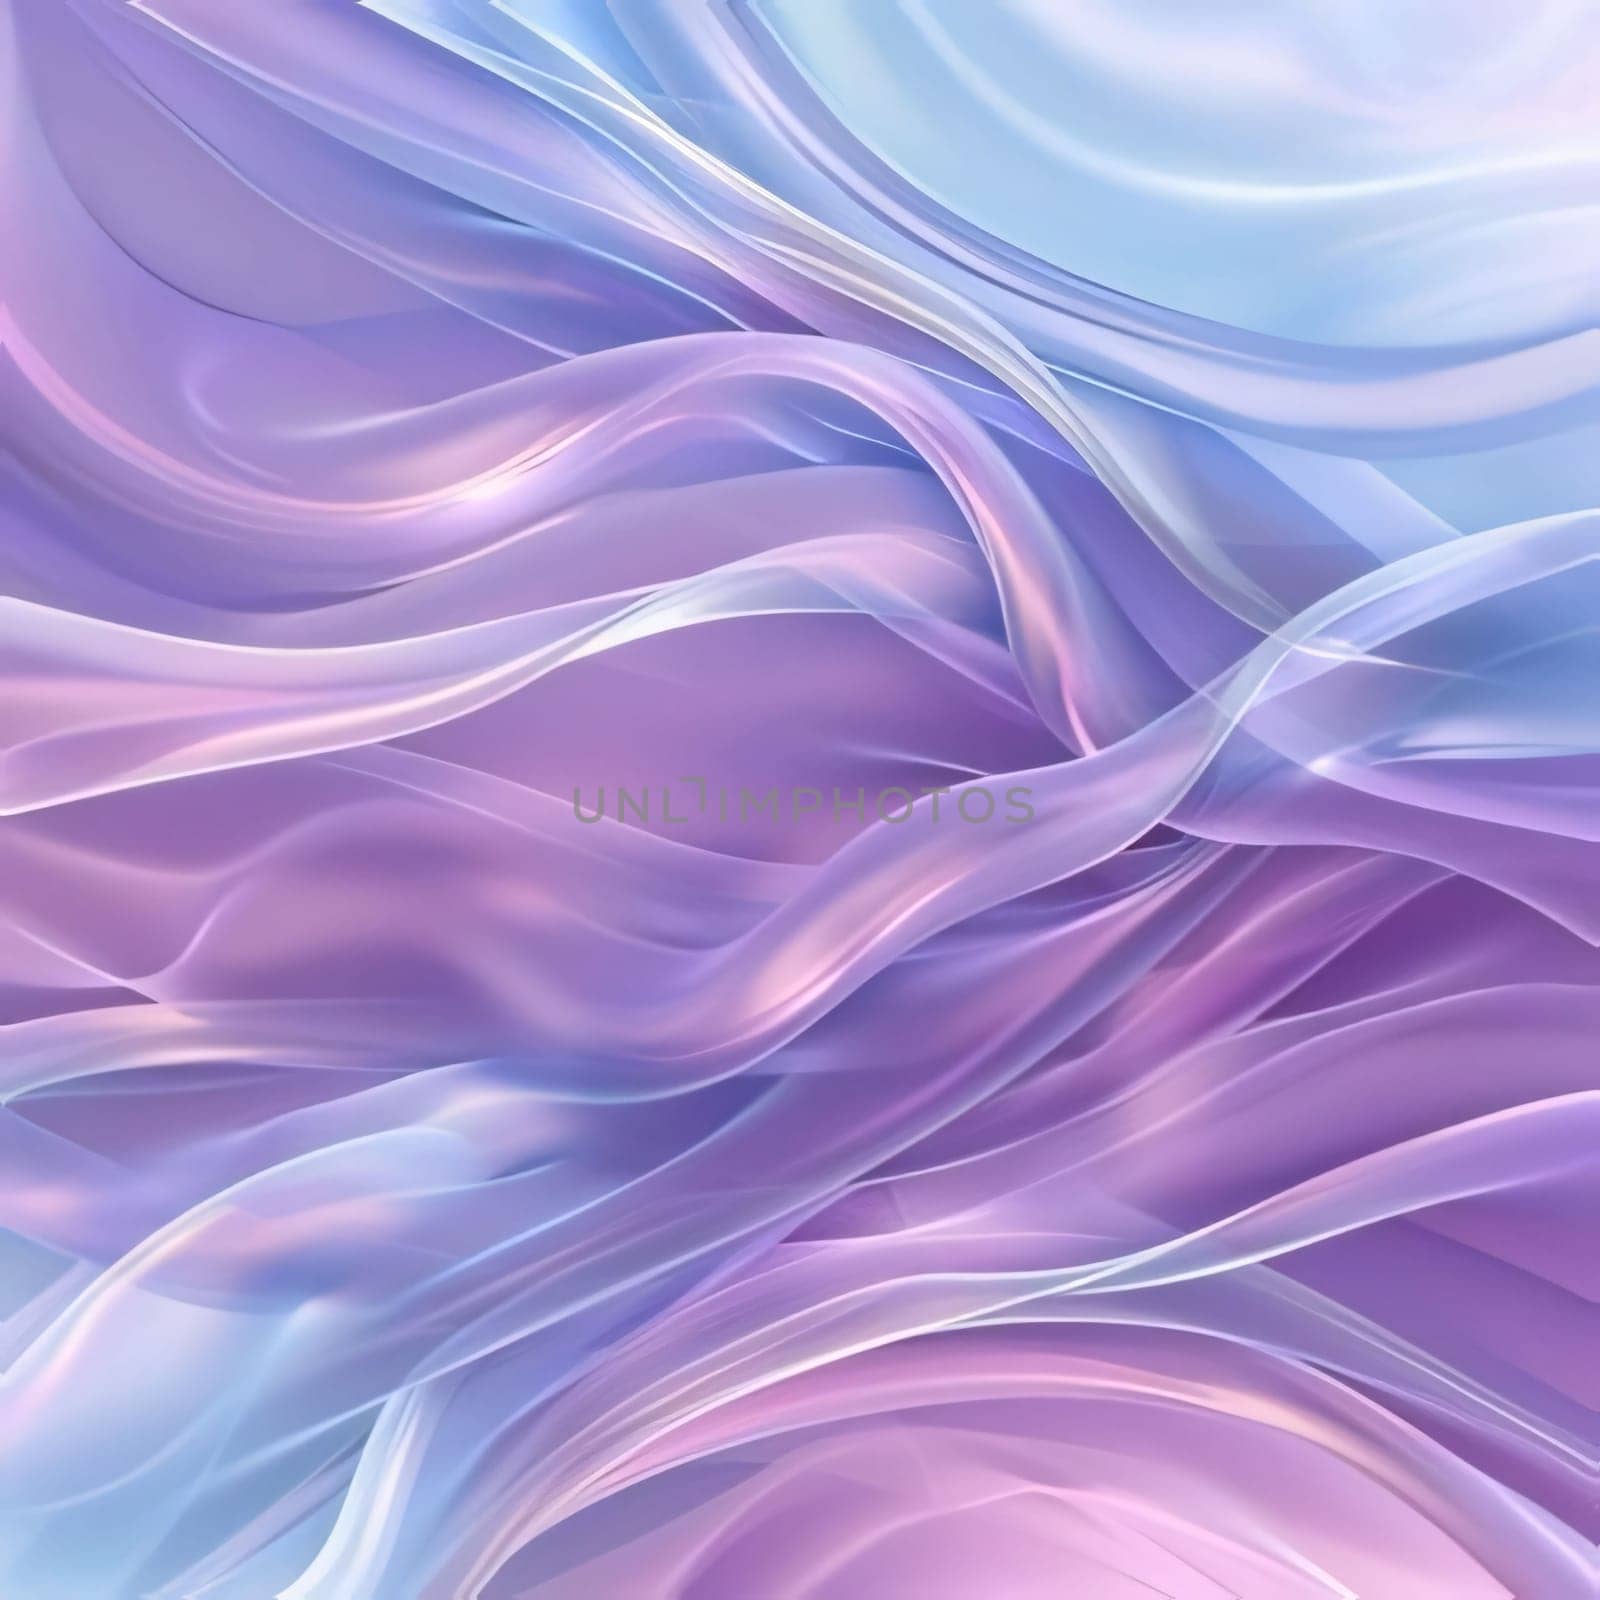 Abstract background design: abstract background with smooth lines in pink and blue colors, digitally generated image